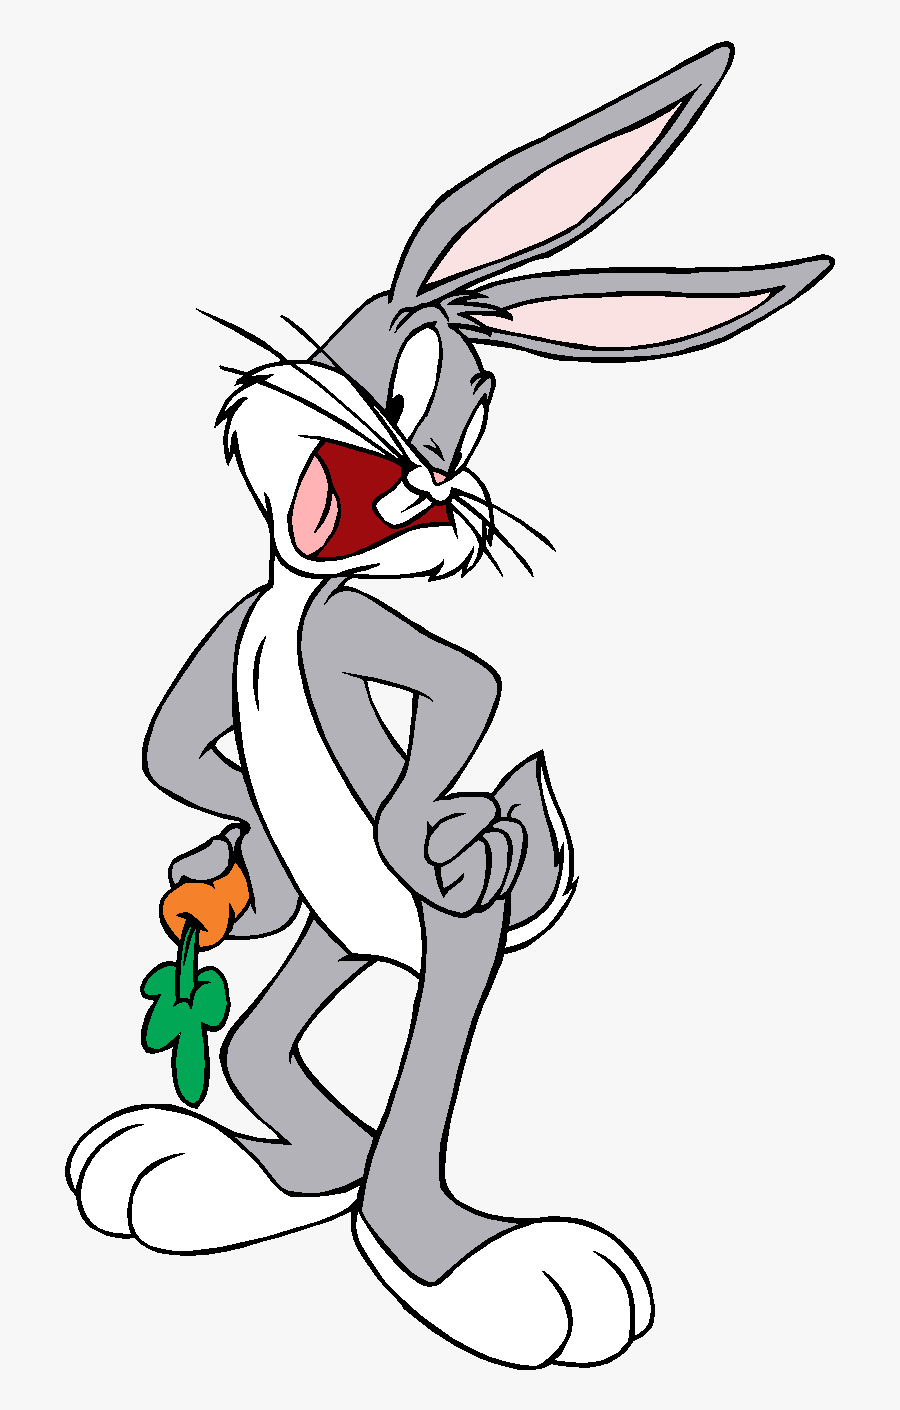 Latest - Bugs Bunny Png Hd, Transparent Clipart